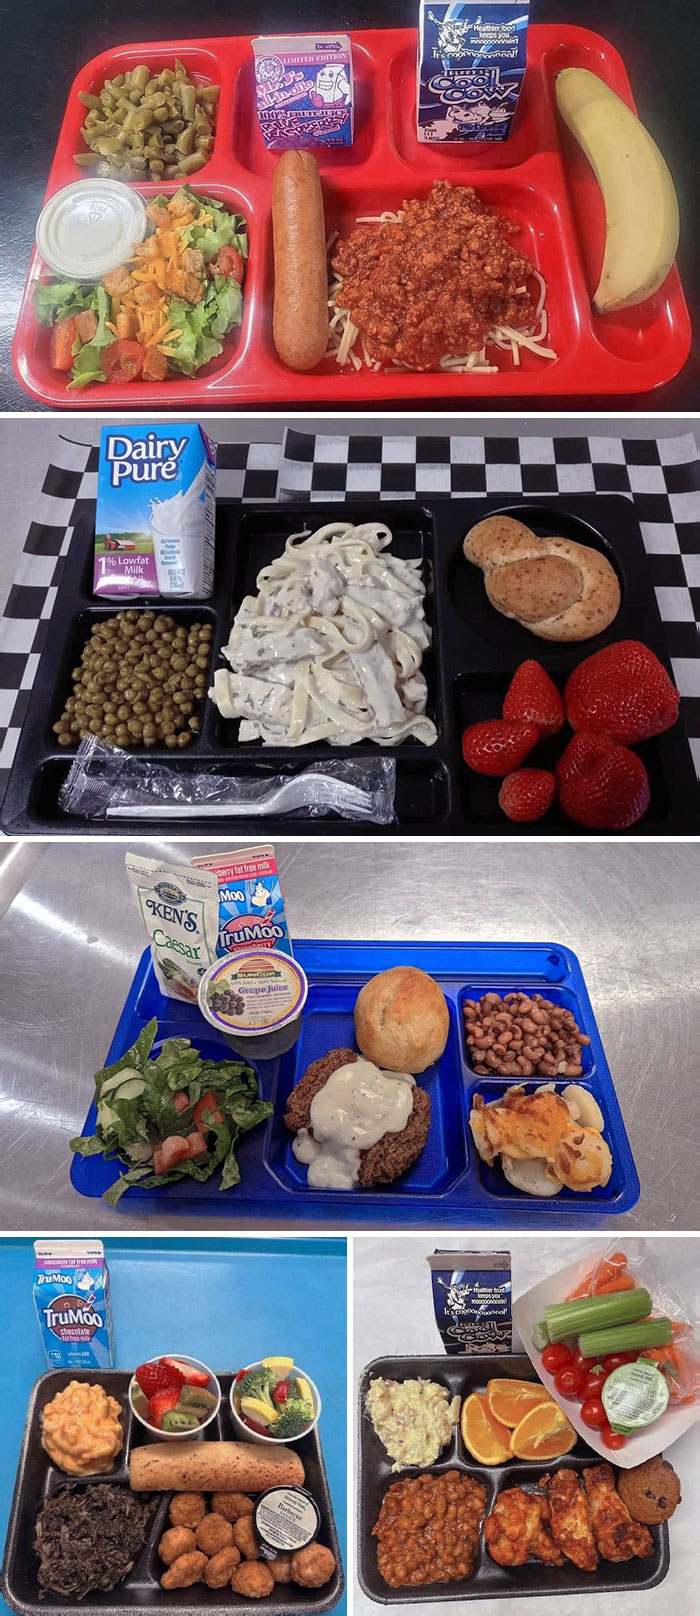 Lunches Served Last Week In Schools In Georgia, USA. They Are All From Different Schools